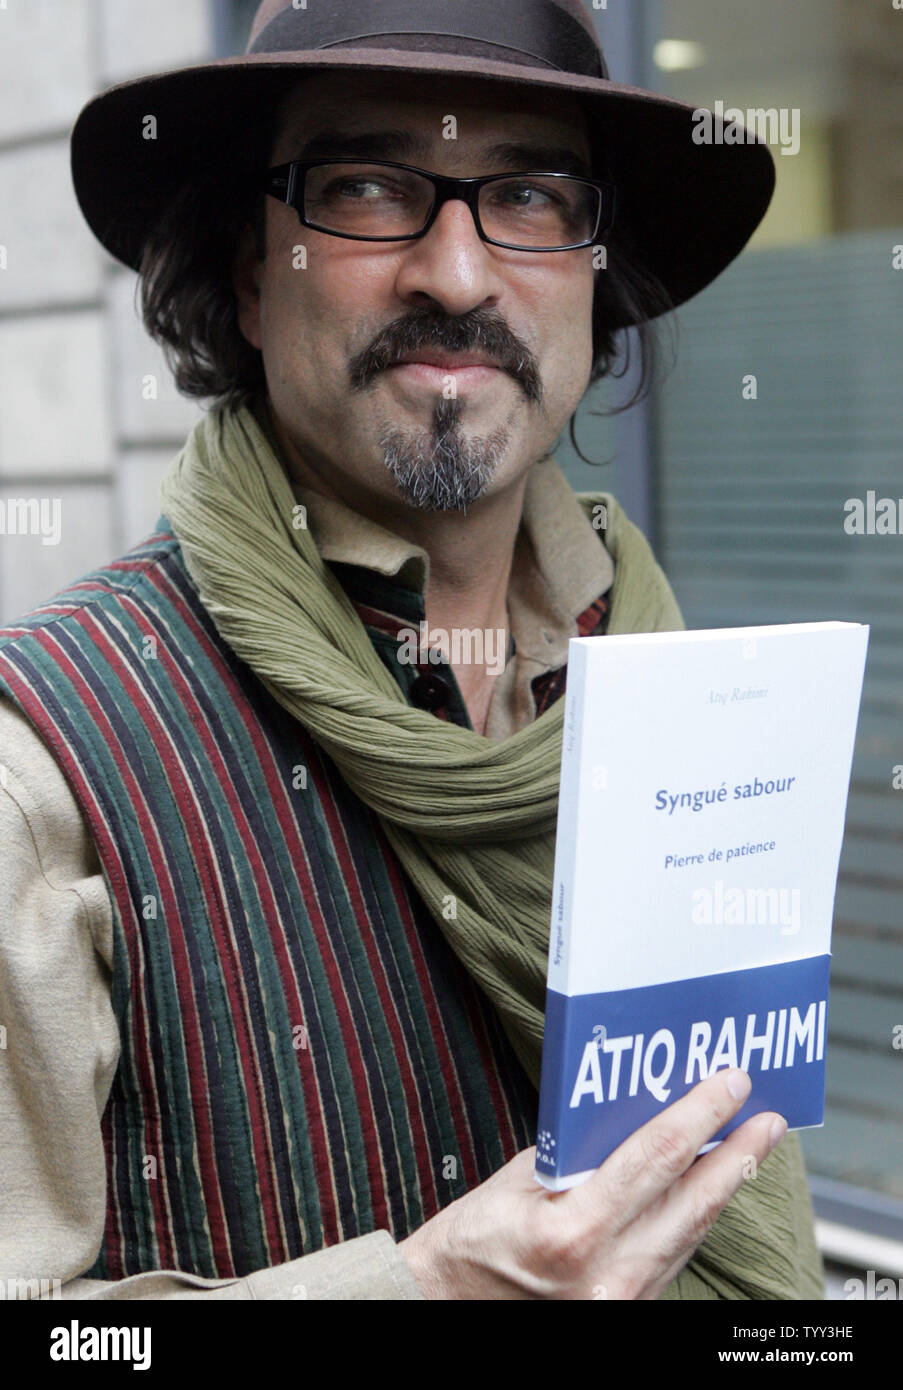 Afghan author Atiq Rahimi poses for photographers after he was awarded France's most prestigious literary prize, the 105-year-old Prix Goncourt, in Paris, November 10, 2008. The author who seeked asylum in France after the Soviet-invasion, wrote "Syngue Sabour'' or "Stone of Patience,'' the story of a woman in a country resembling Afghanistan whose husband has been wounded in battle and now lies as paralyzed as a stone. (UPI Photo/Eco Clement) Stock Photo